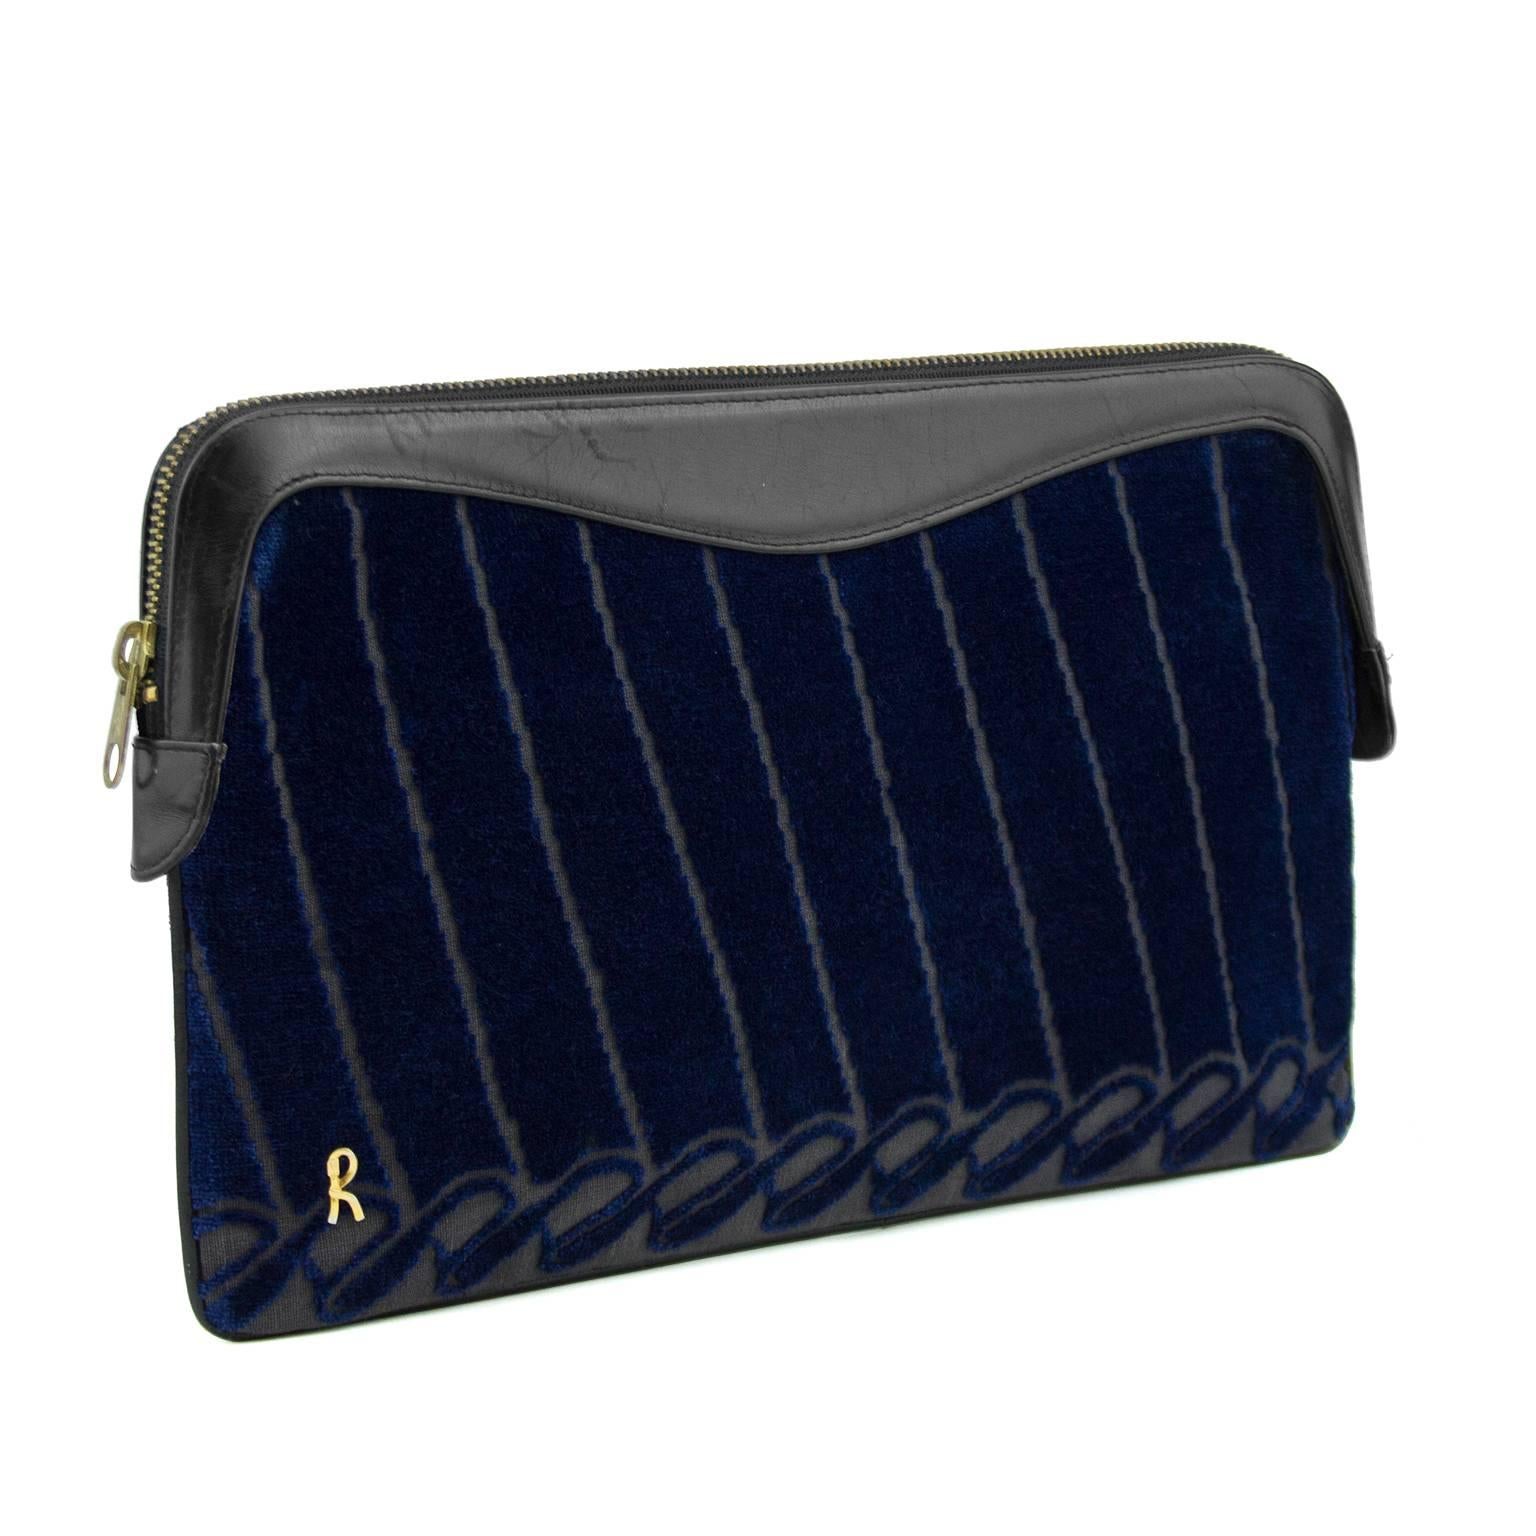 Beautiful 1970s Roberta Di Camerino navy velvet clutch. Trimmed in black leather with a zip top opening and signature goldtone R on the bottom corner. The leather interior is in perfect condition with one zip pocket and one smaller open pocket.